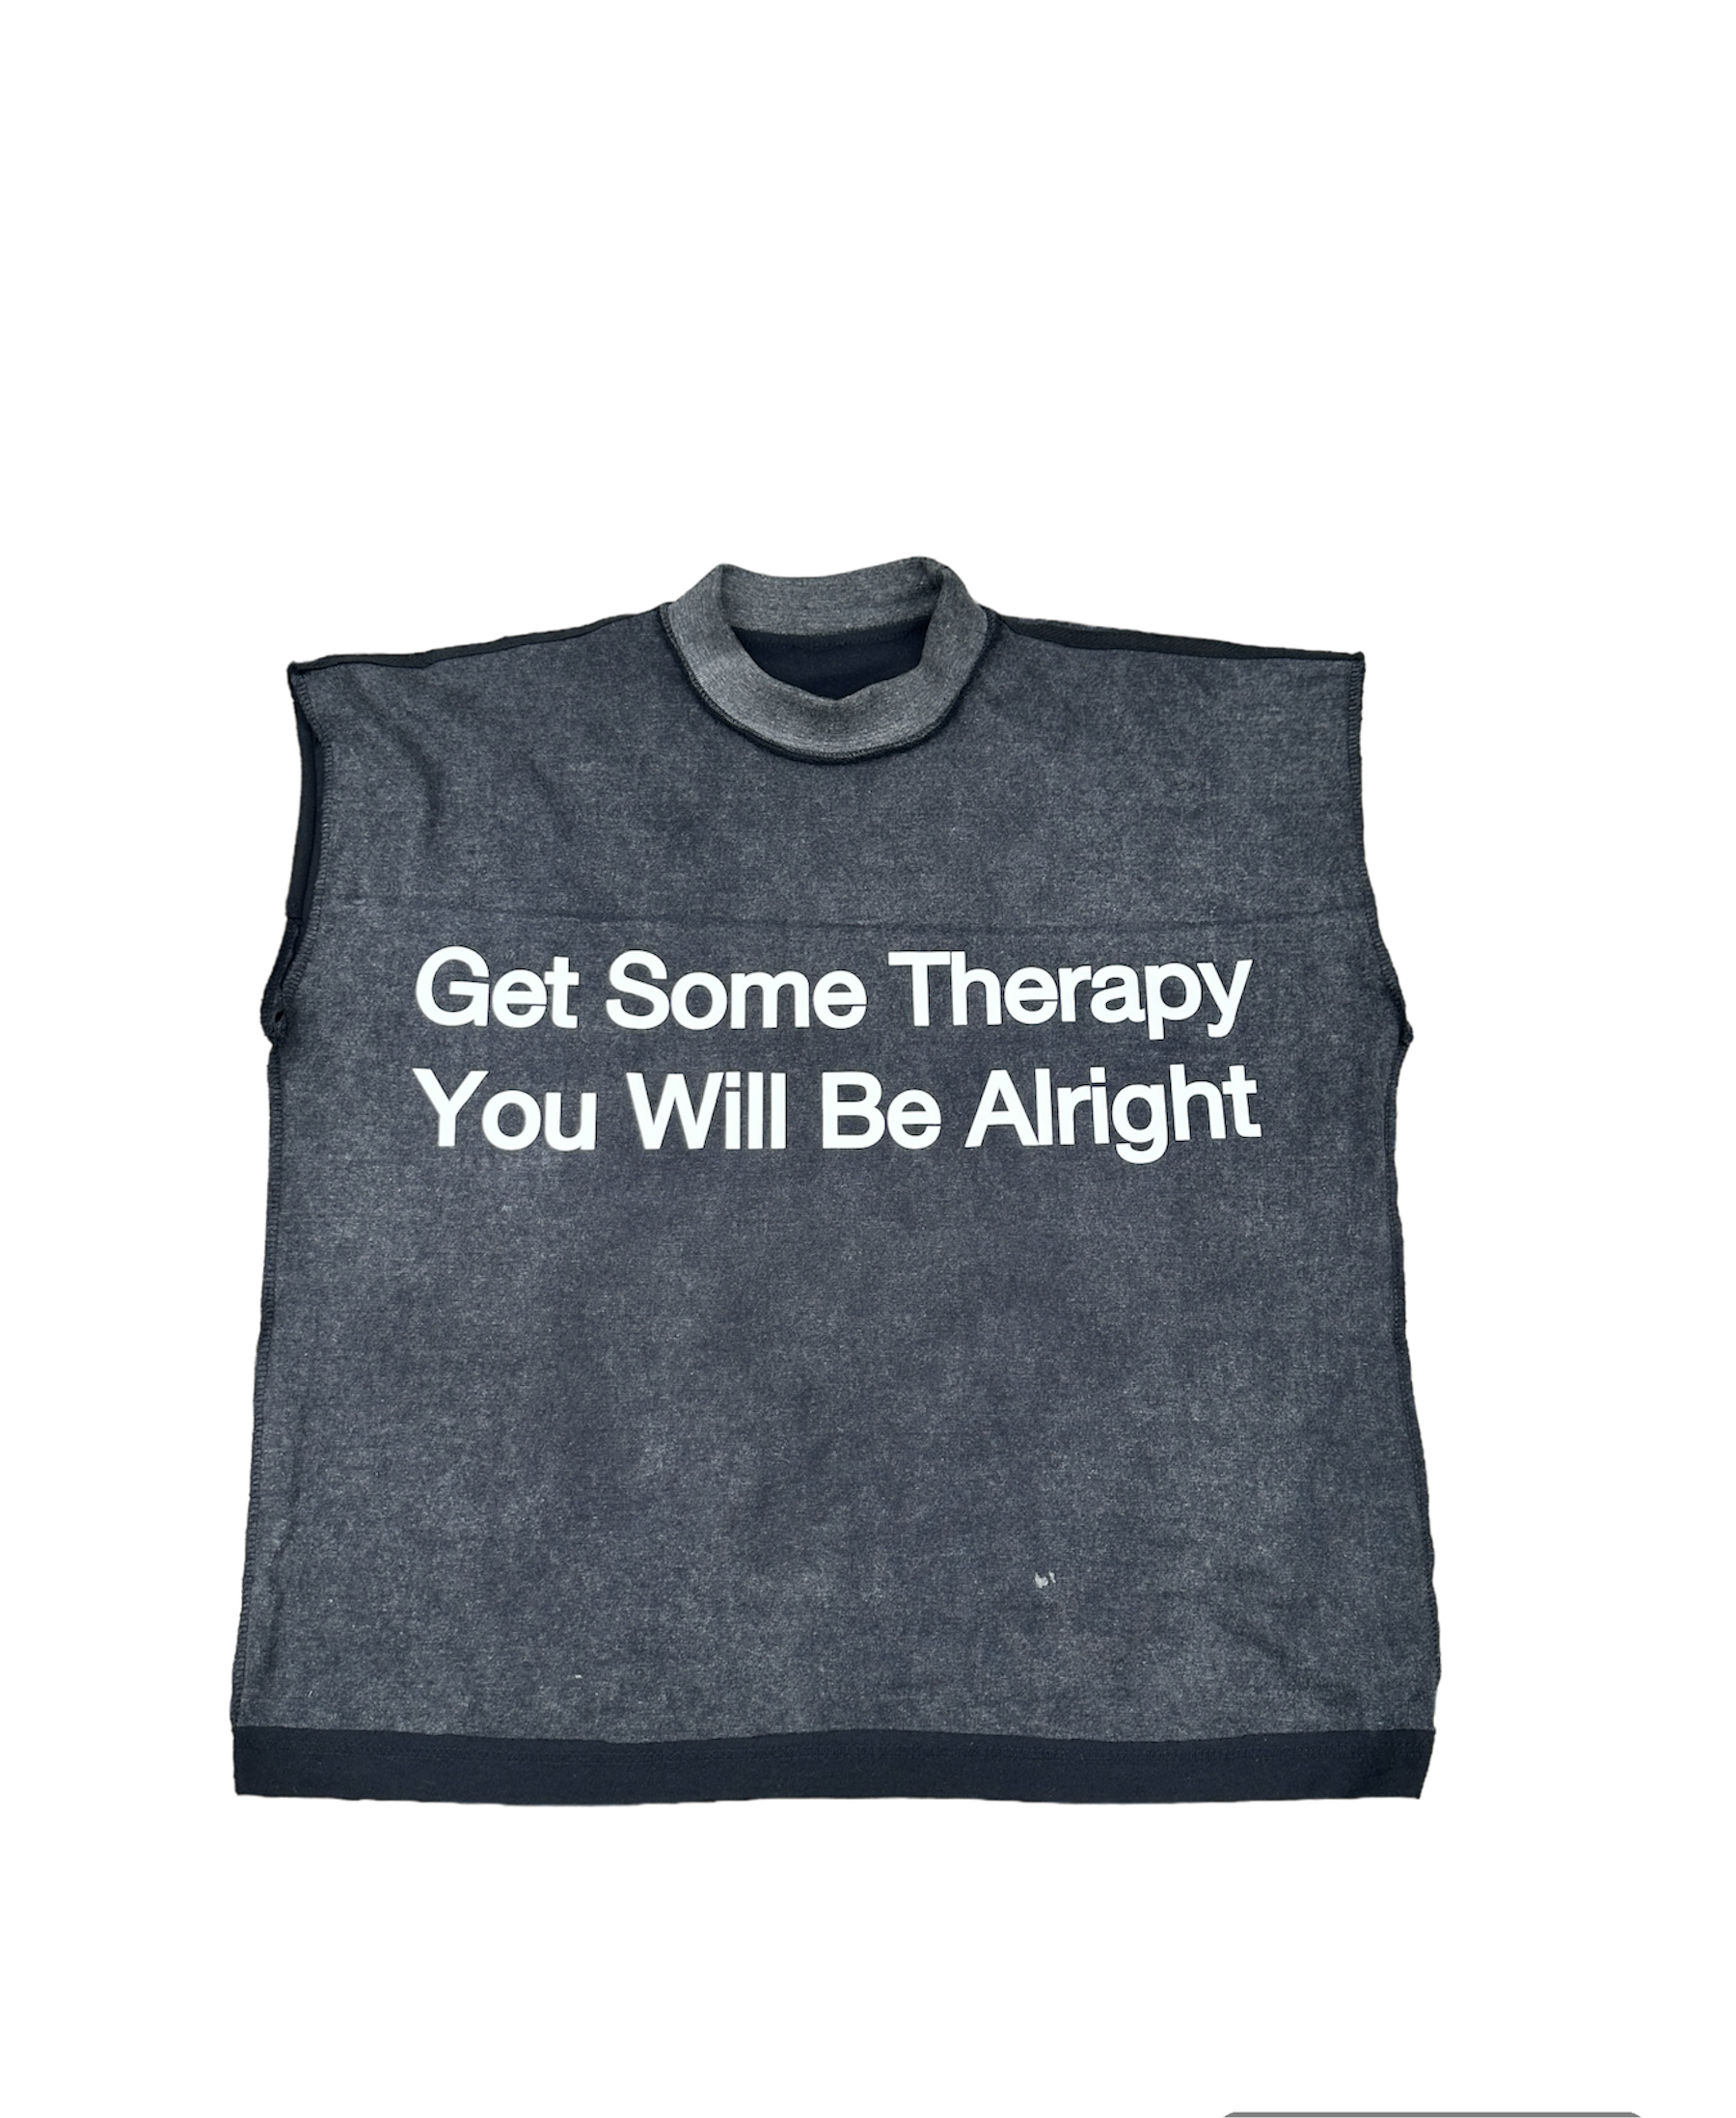 Therapy sleeveless